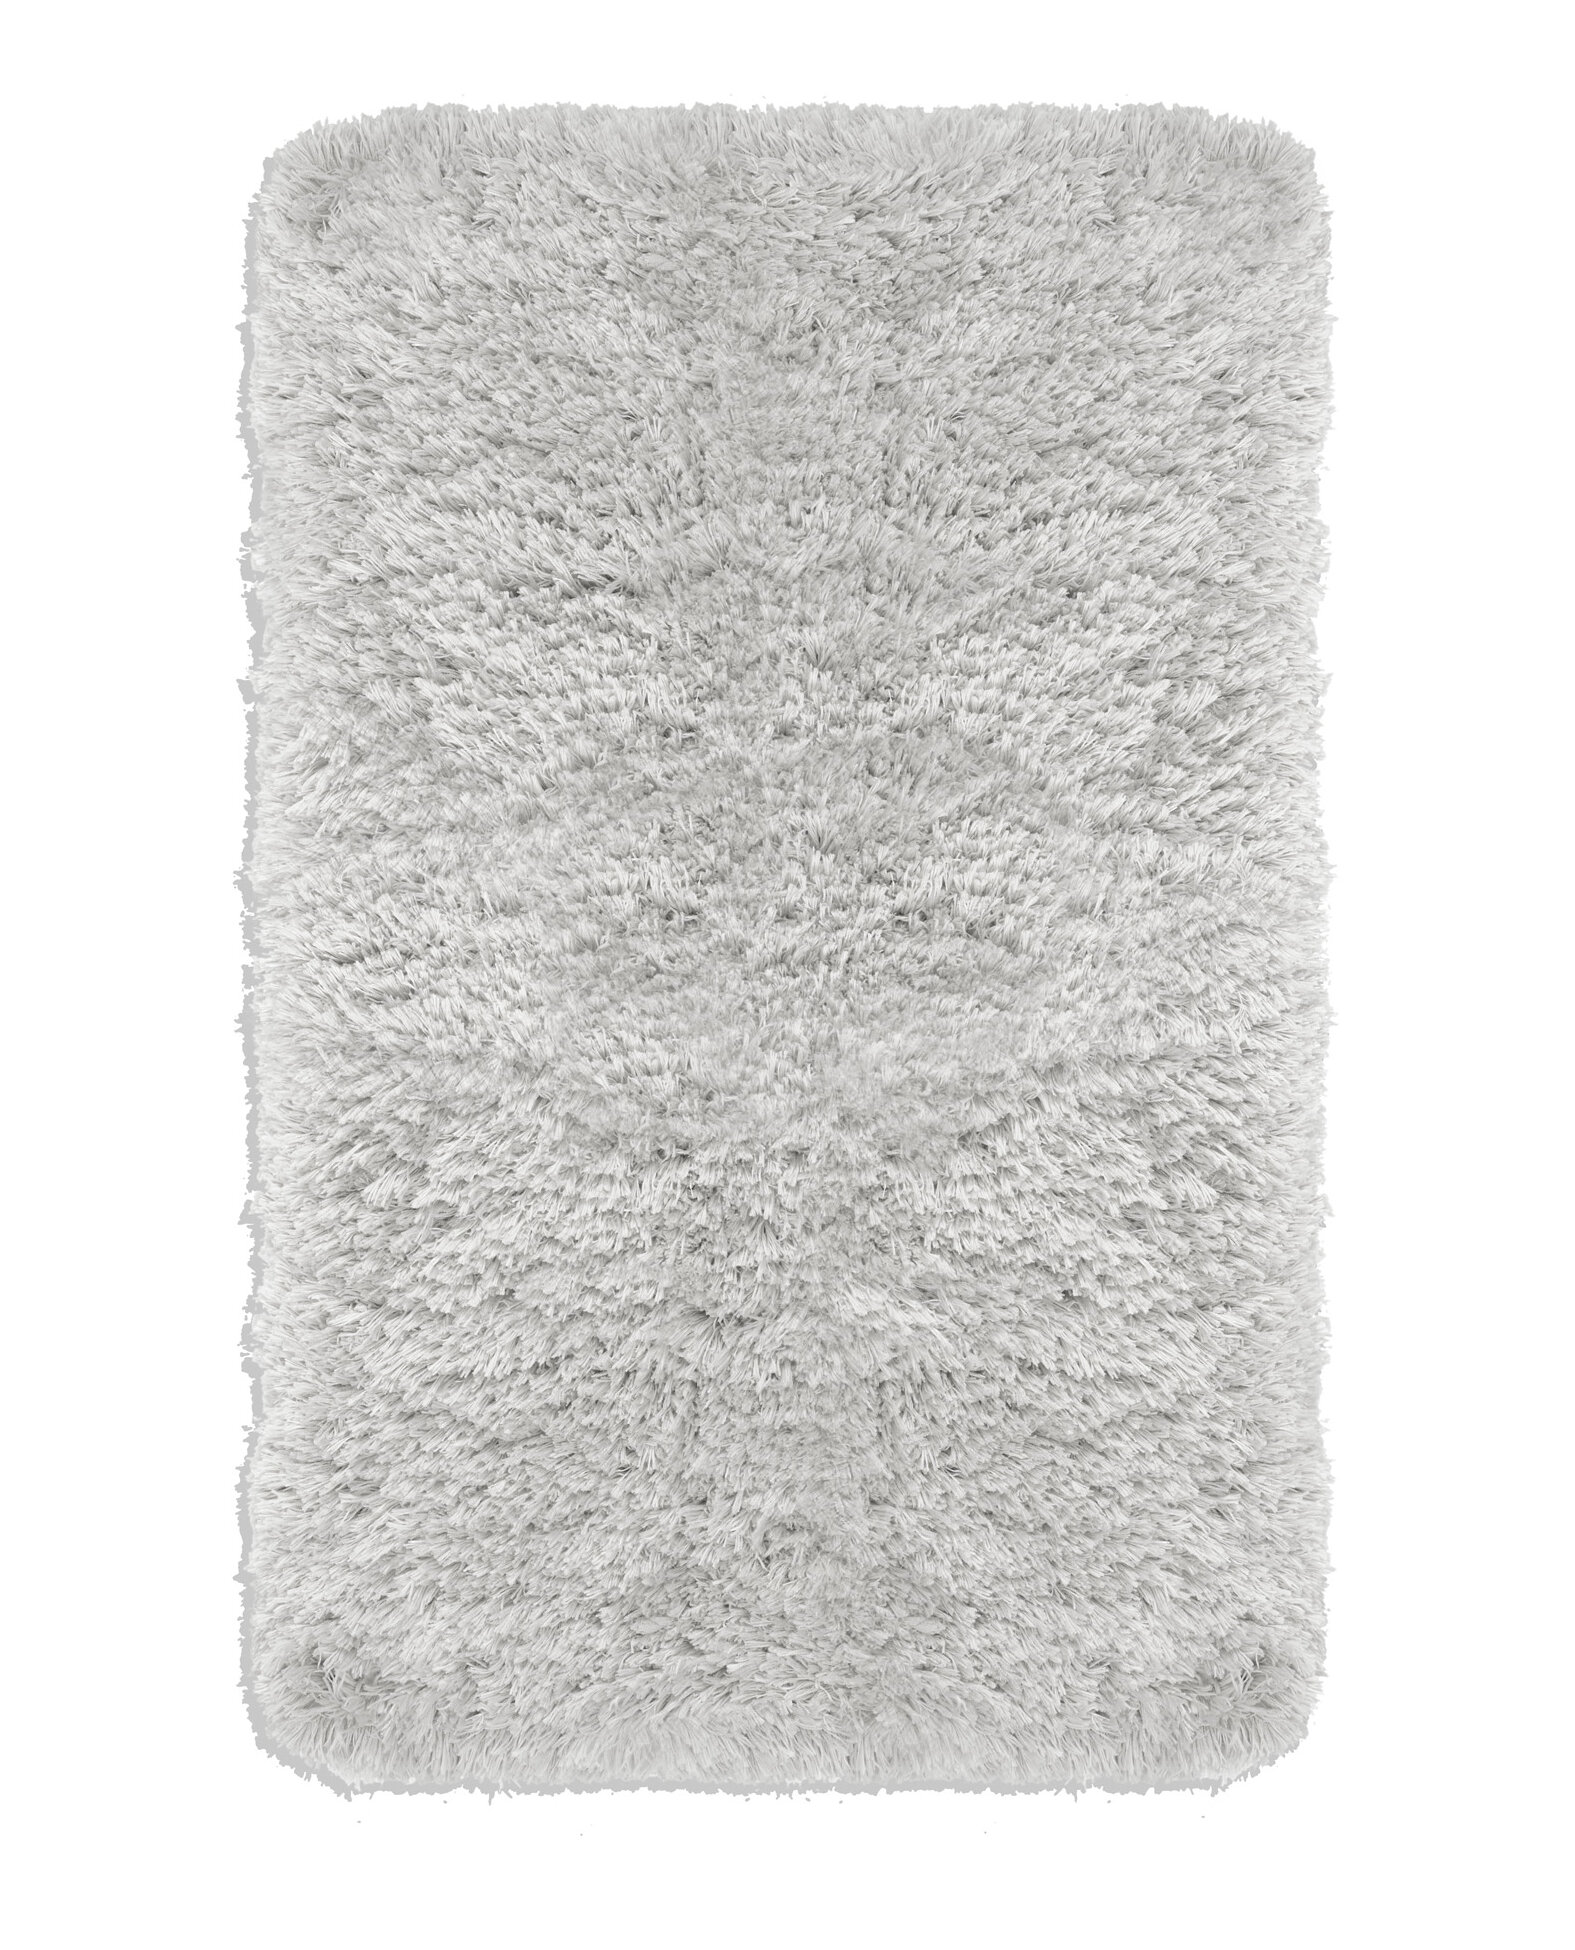 Shaggy Soft and Absorbent, 24x47, Grey Details about   Buganda Microfiber Bathroom Rugs Runner 